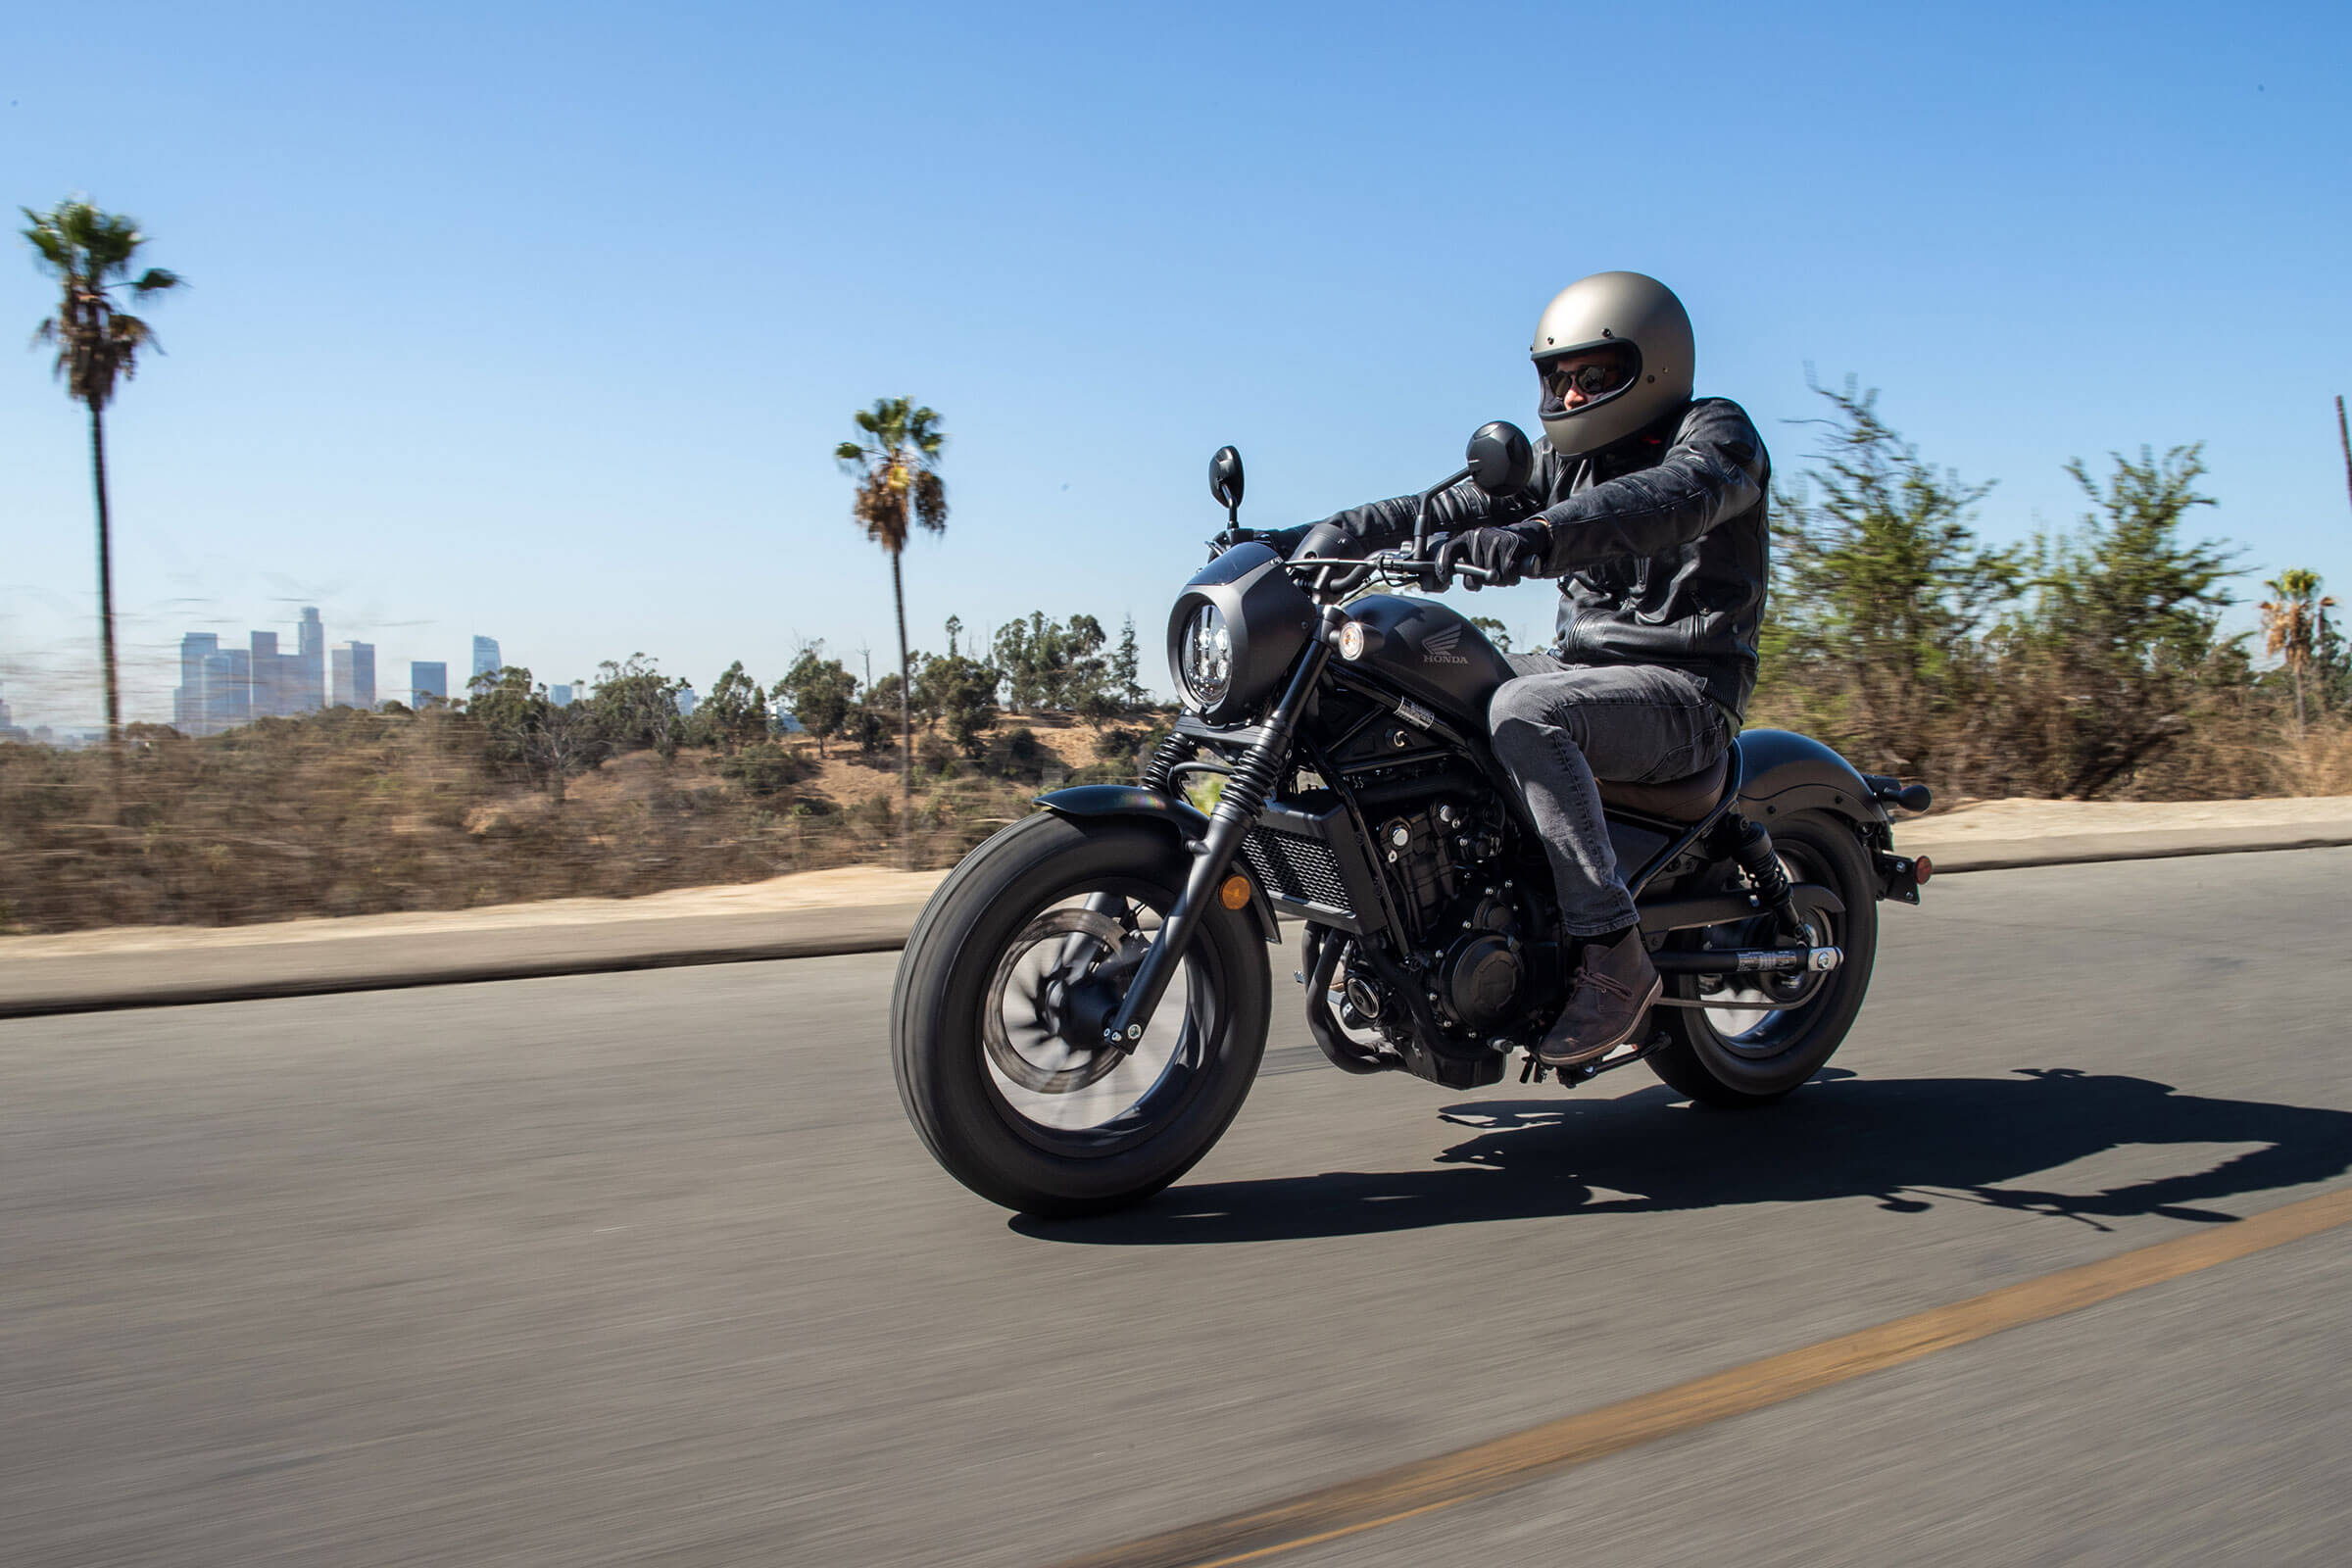 A rider cruising down the highway on the 2022 Honda Rebel 500